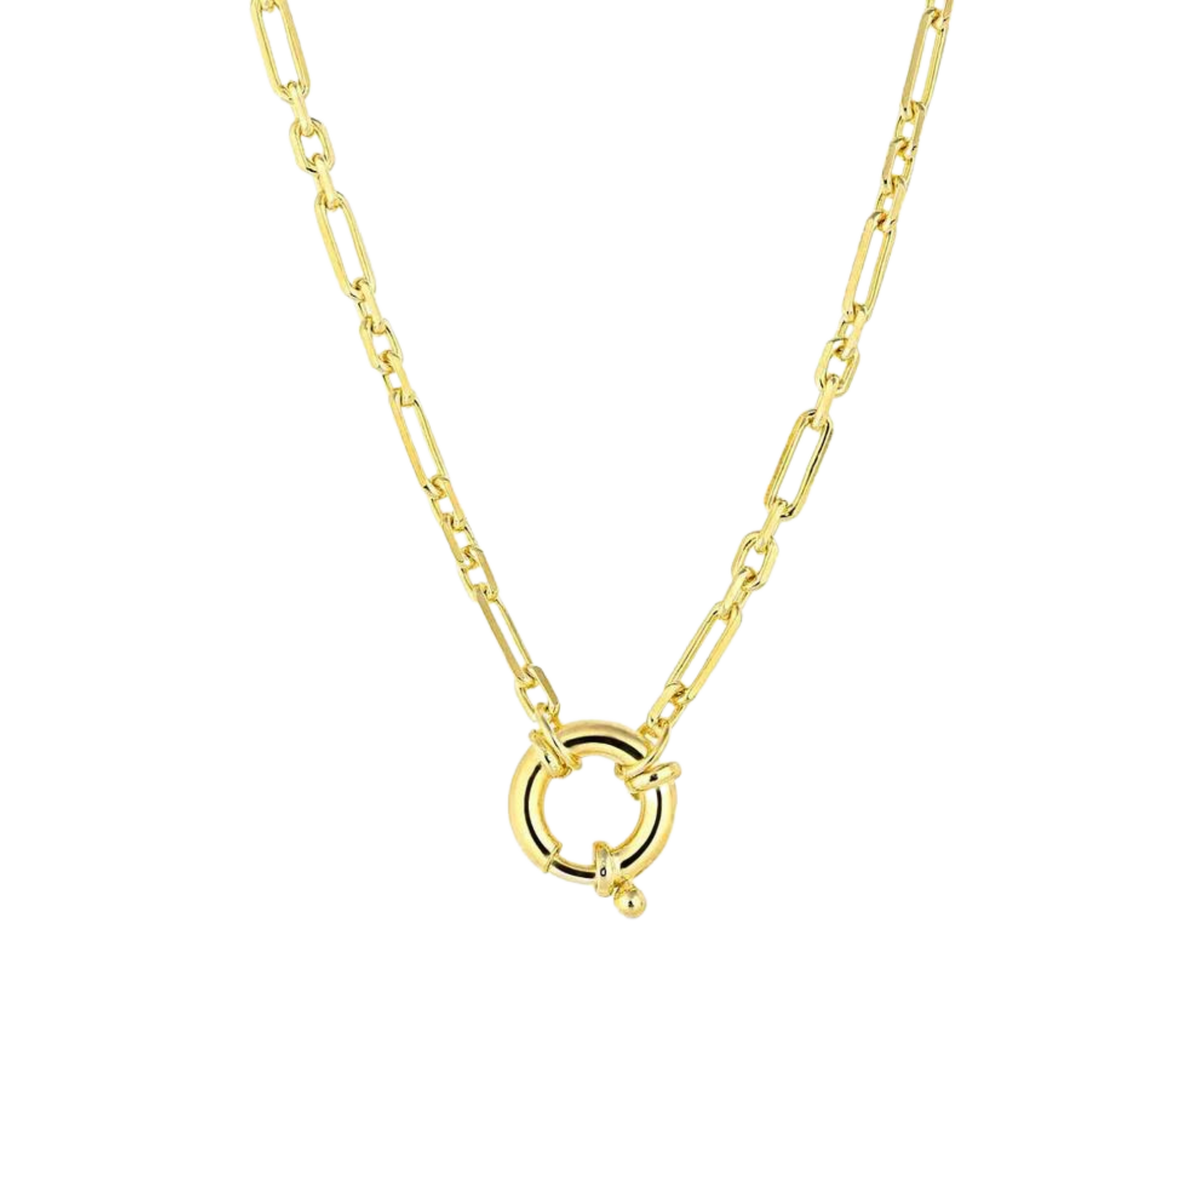 Large Lock Sterling Silver Chain Necklace